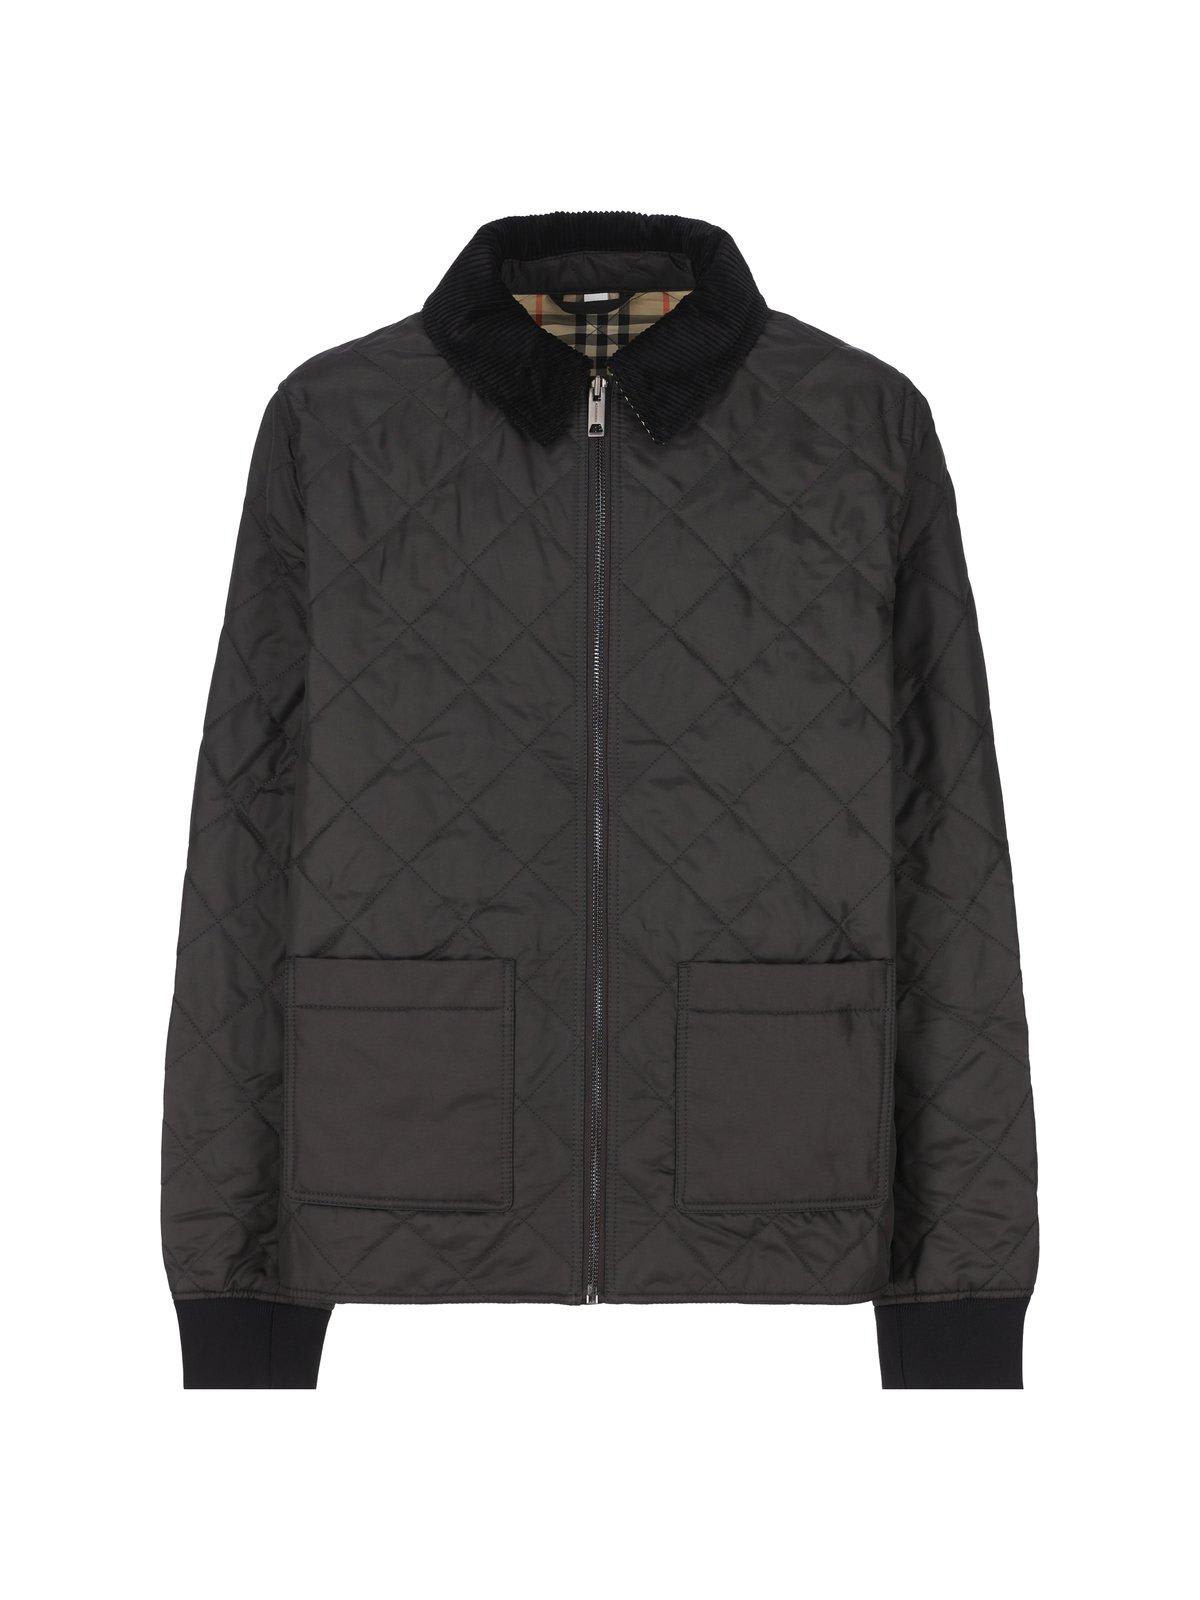 Burberry Kids' Diamond Quilted Zipped Jacket In Black